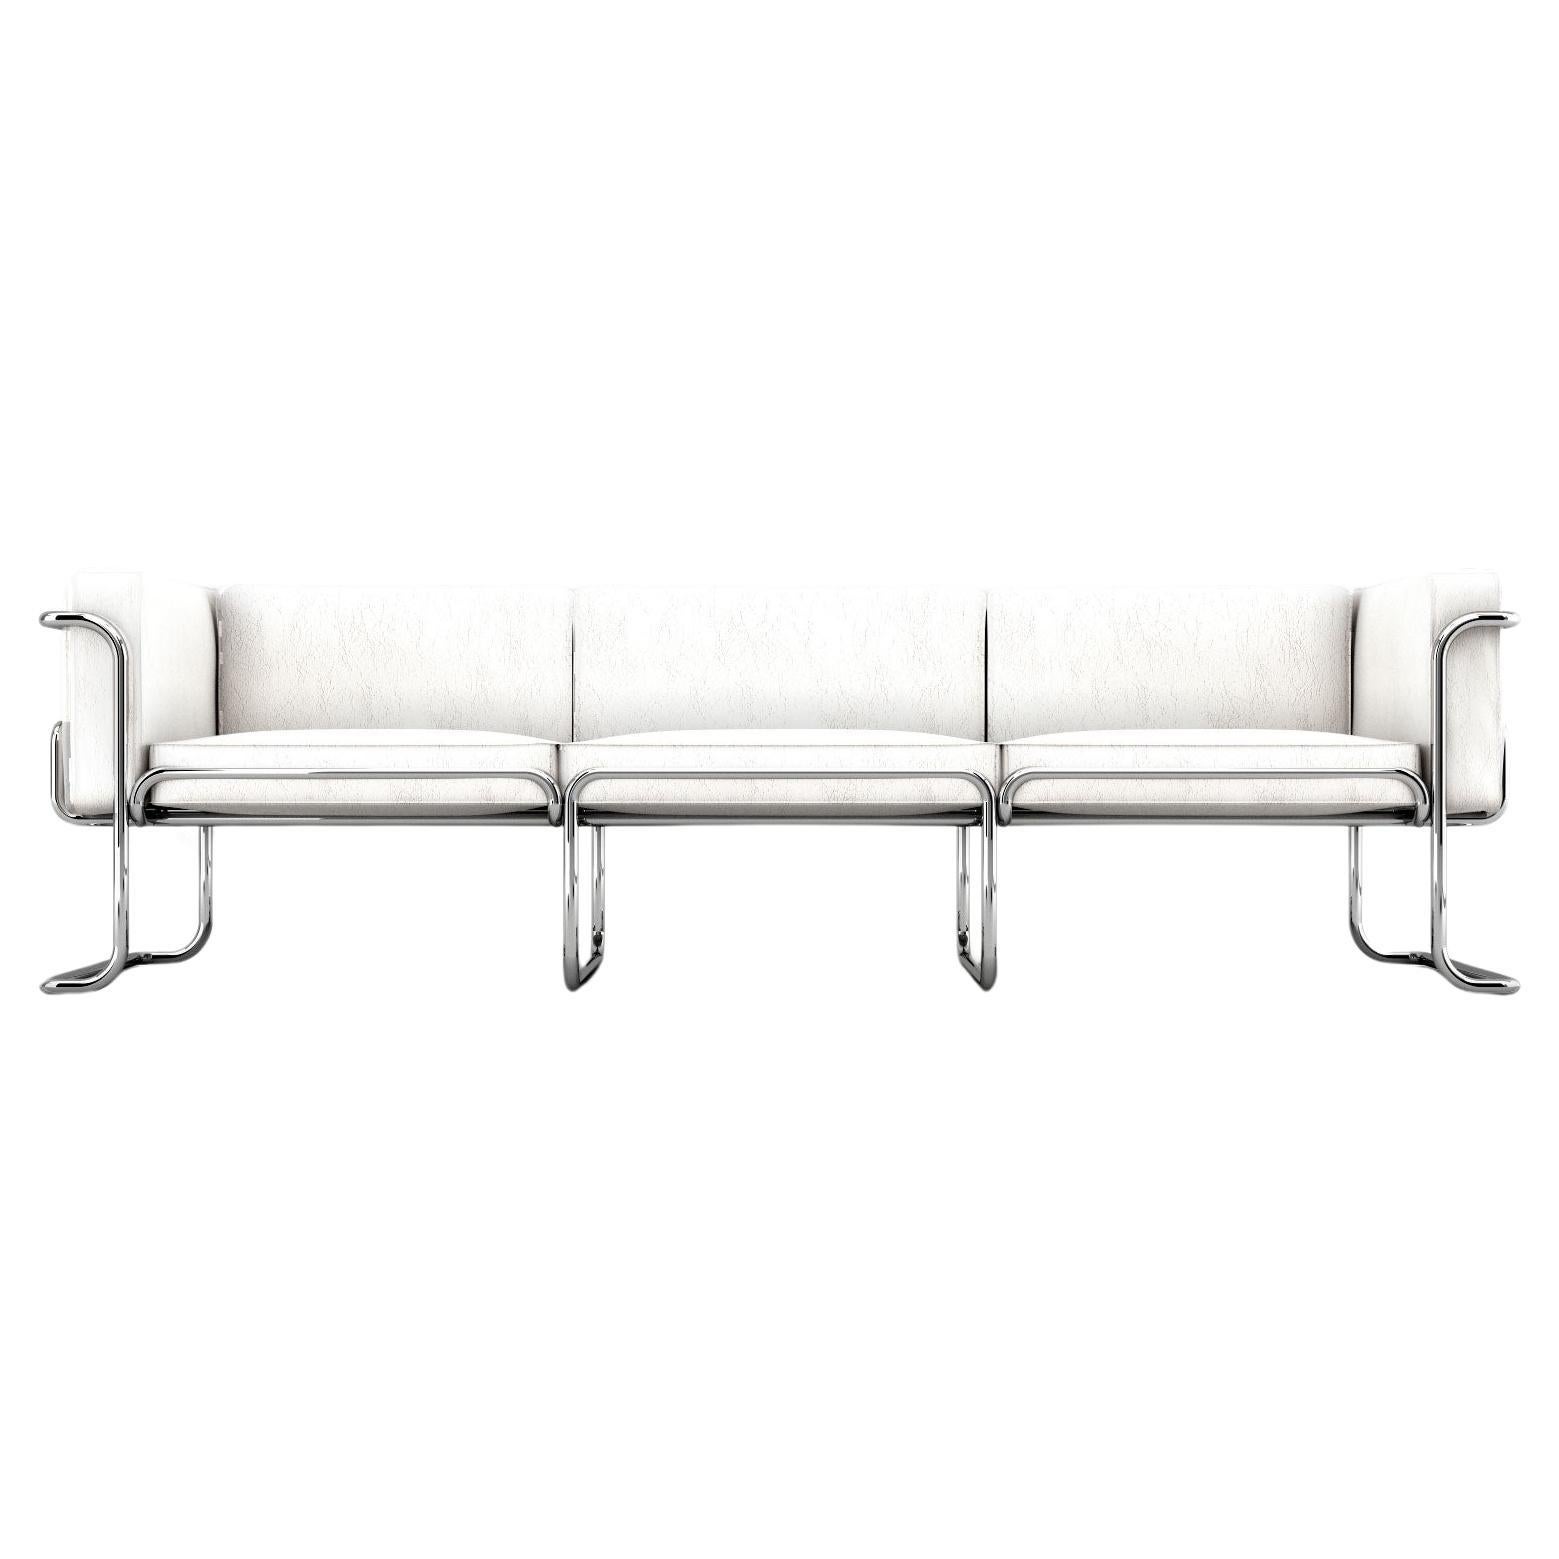 Lotus 3 Seat Sofa - Modern White Leather Sofa with Stainless Steel Legs